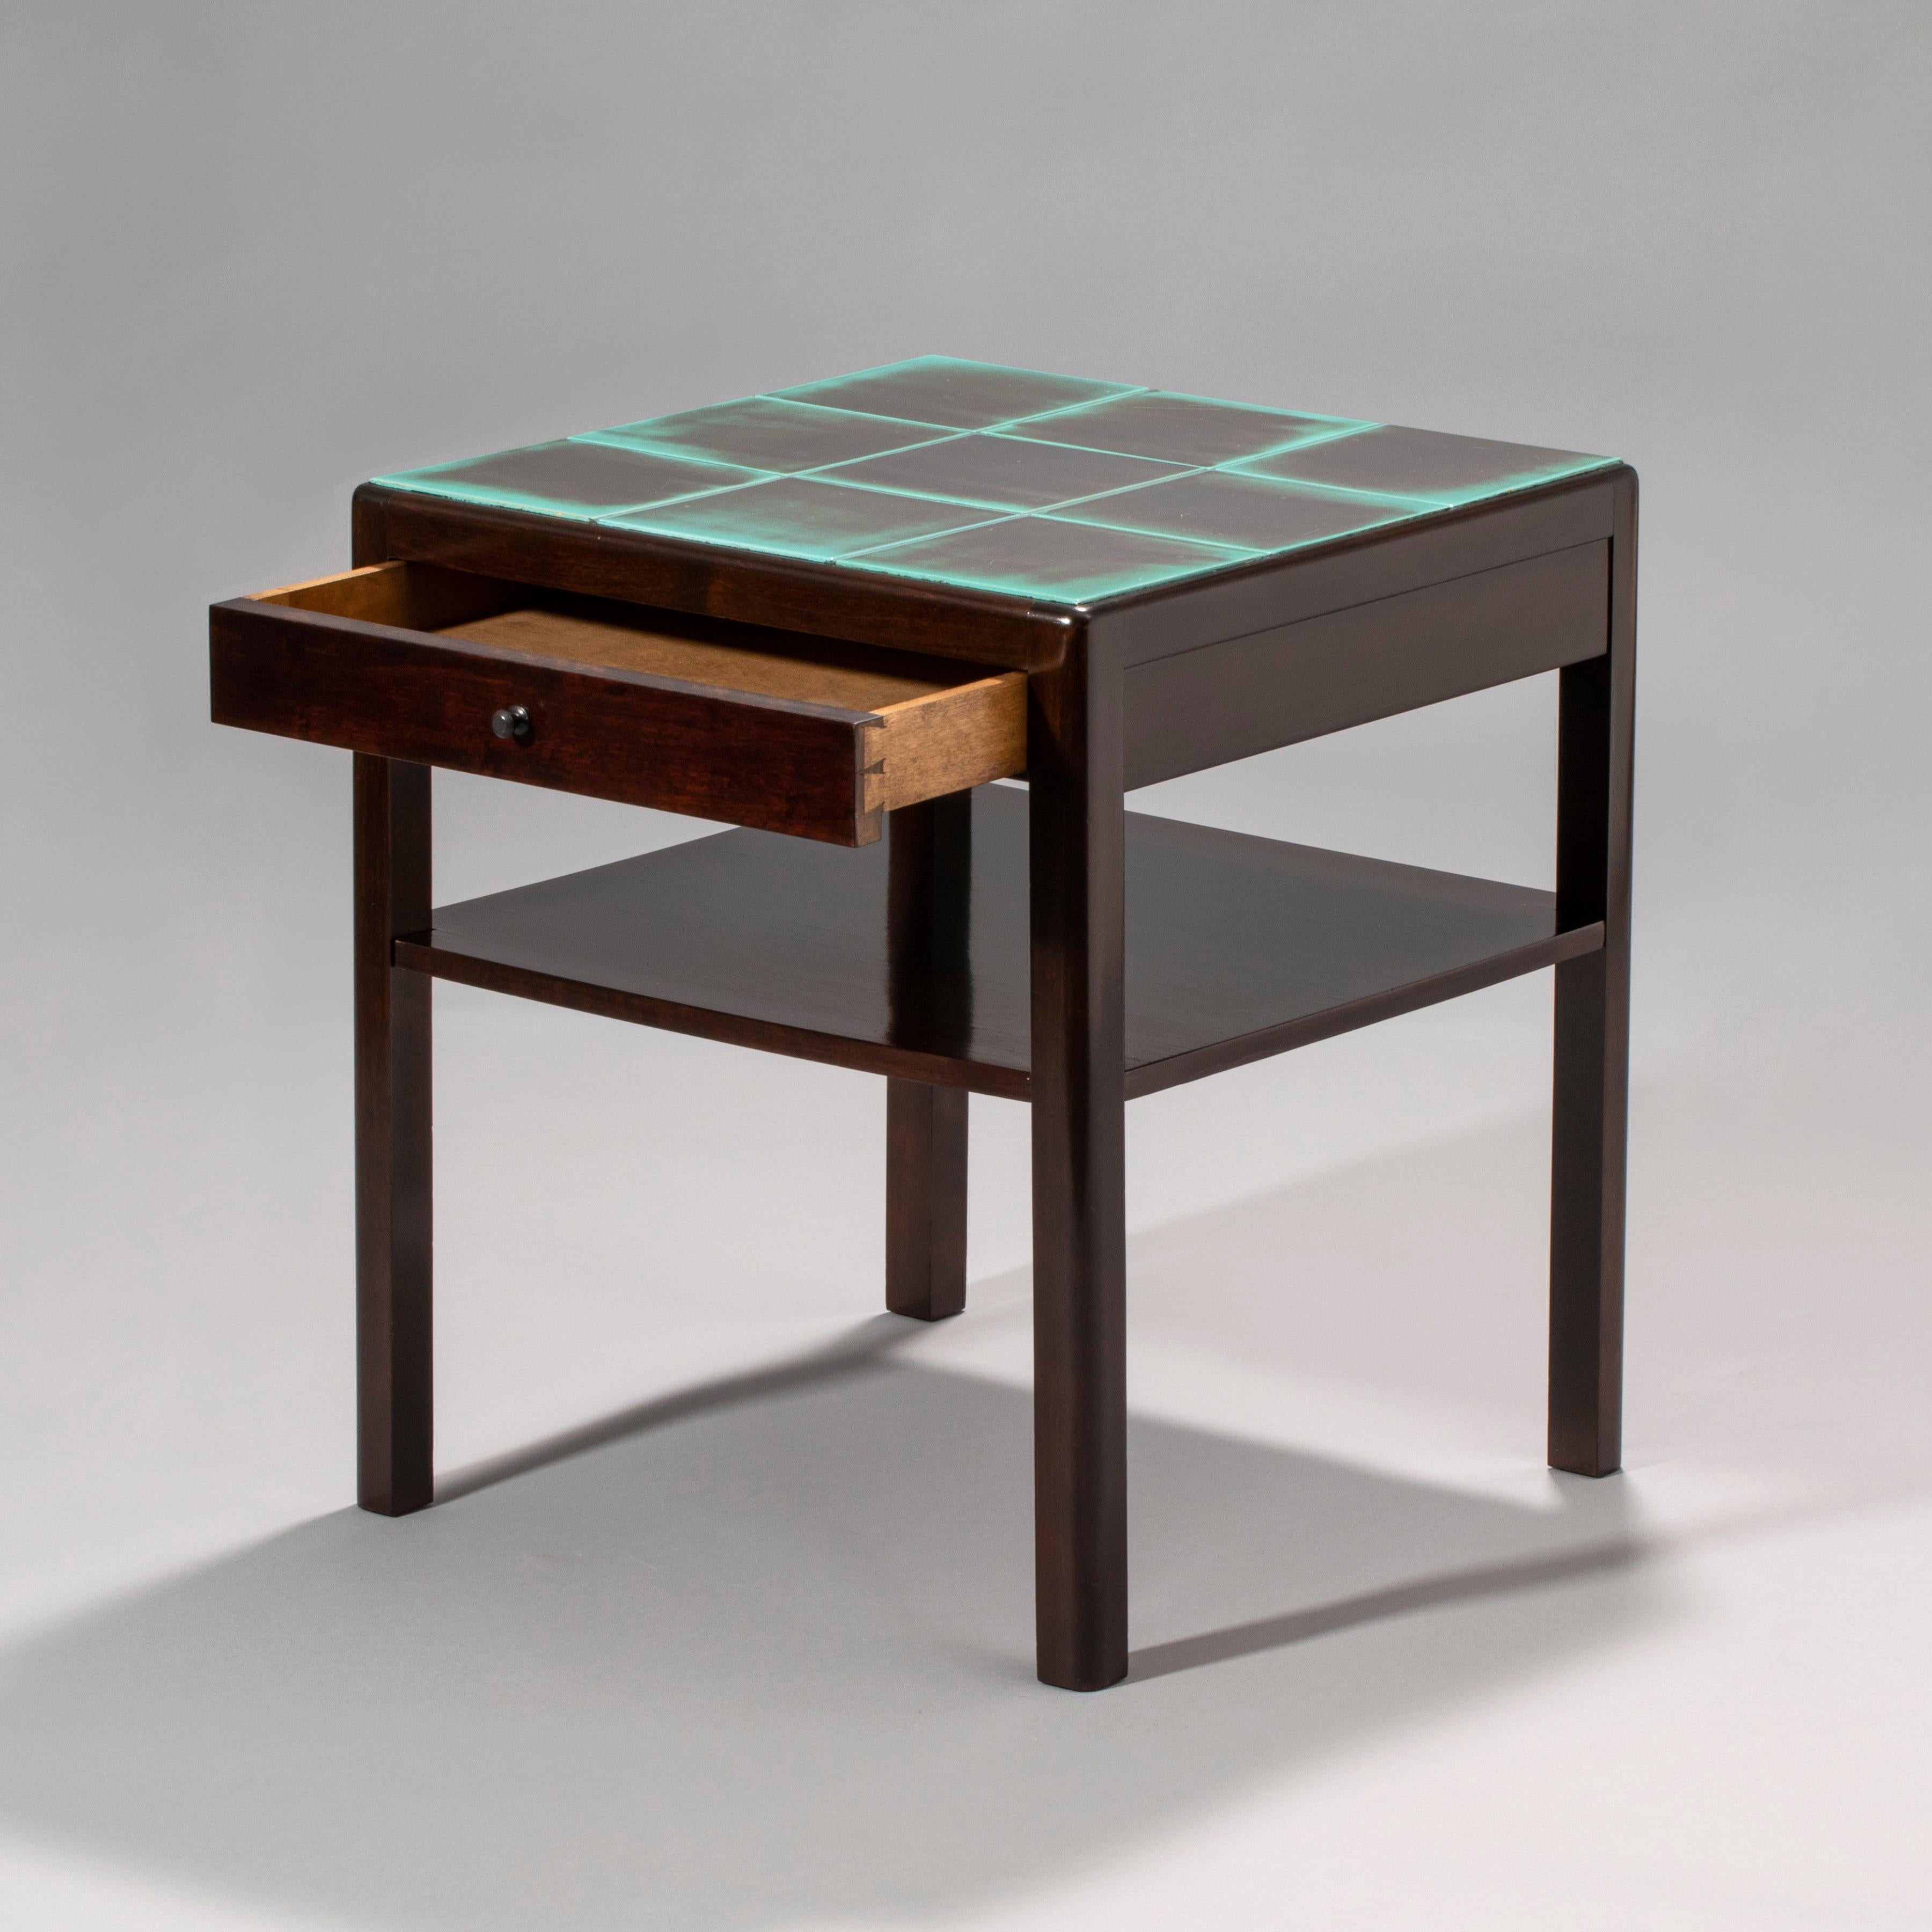 The square top composed of black and turquoise glazed ceramic tiles, set within a ebonized birch frame, the single drawer frieze centering a circular pull, above a shelf stretcher, raised on quarter-rounded legs. 

Stamped underneath with the